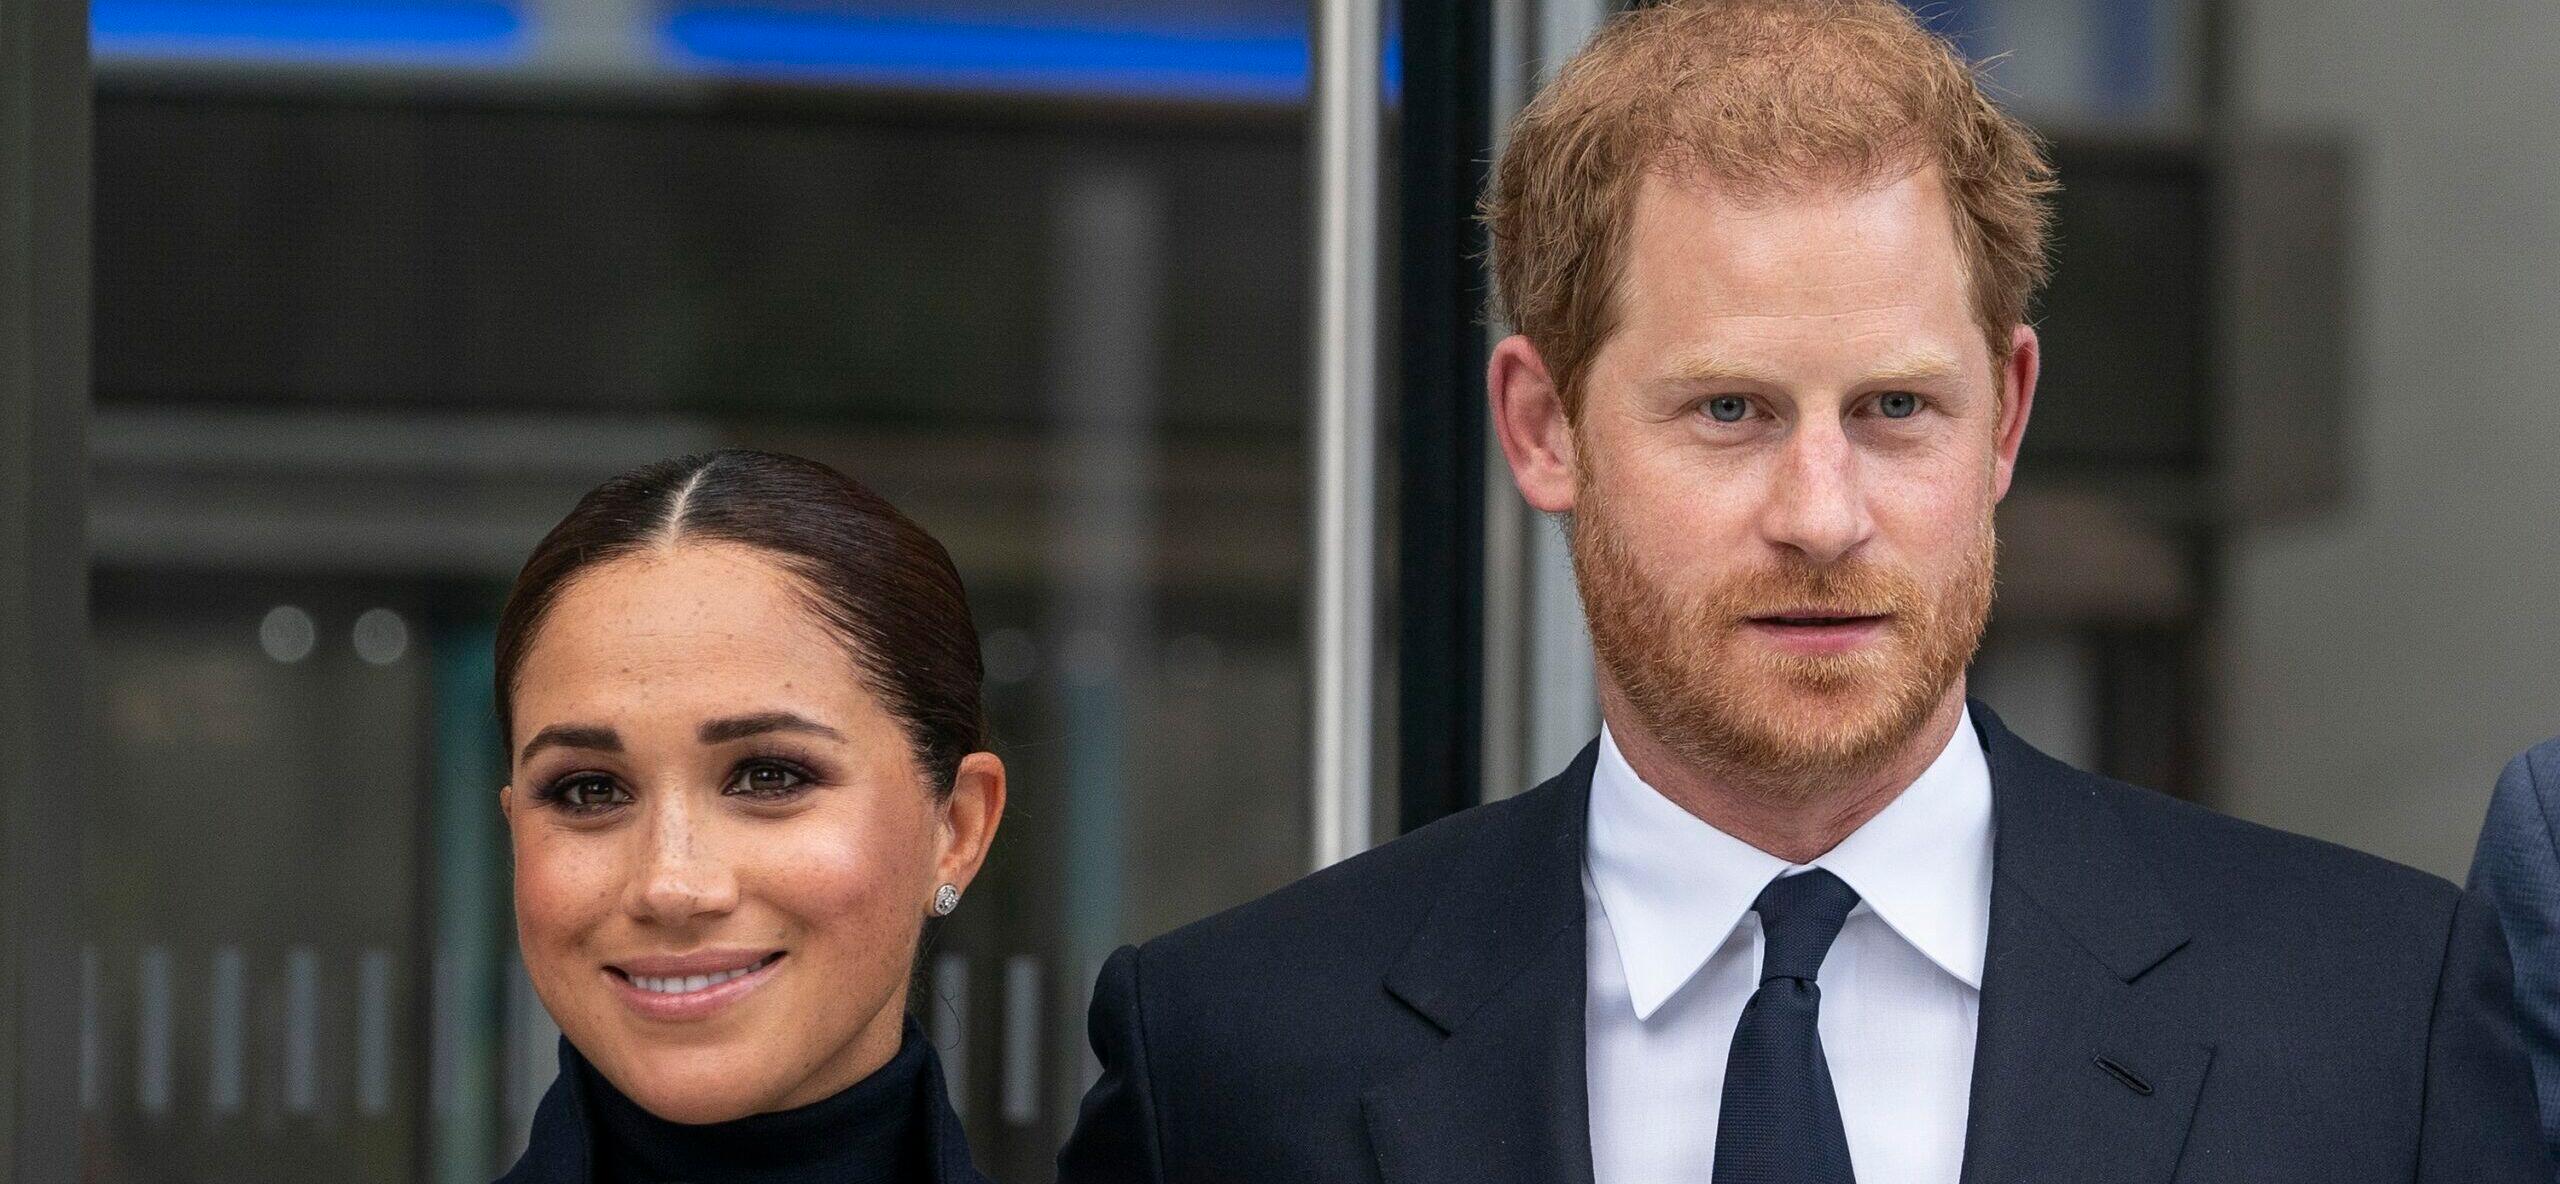 Fans React To Prince Harry And Meghan Markle’s Childless Christmas Card